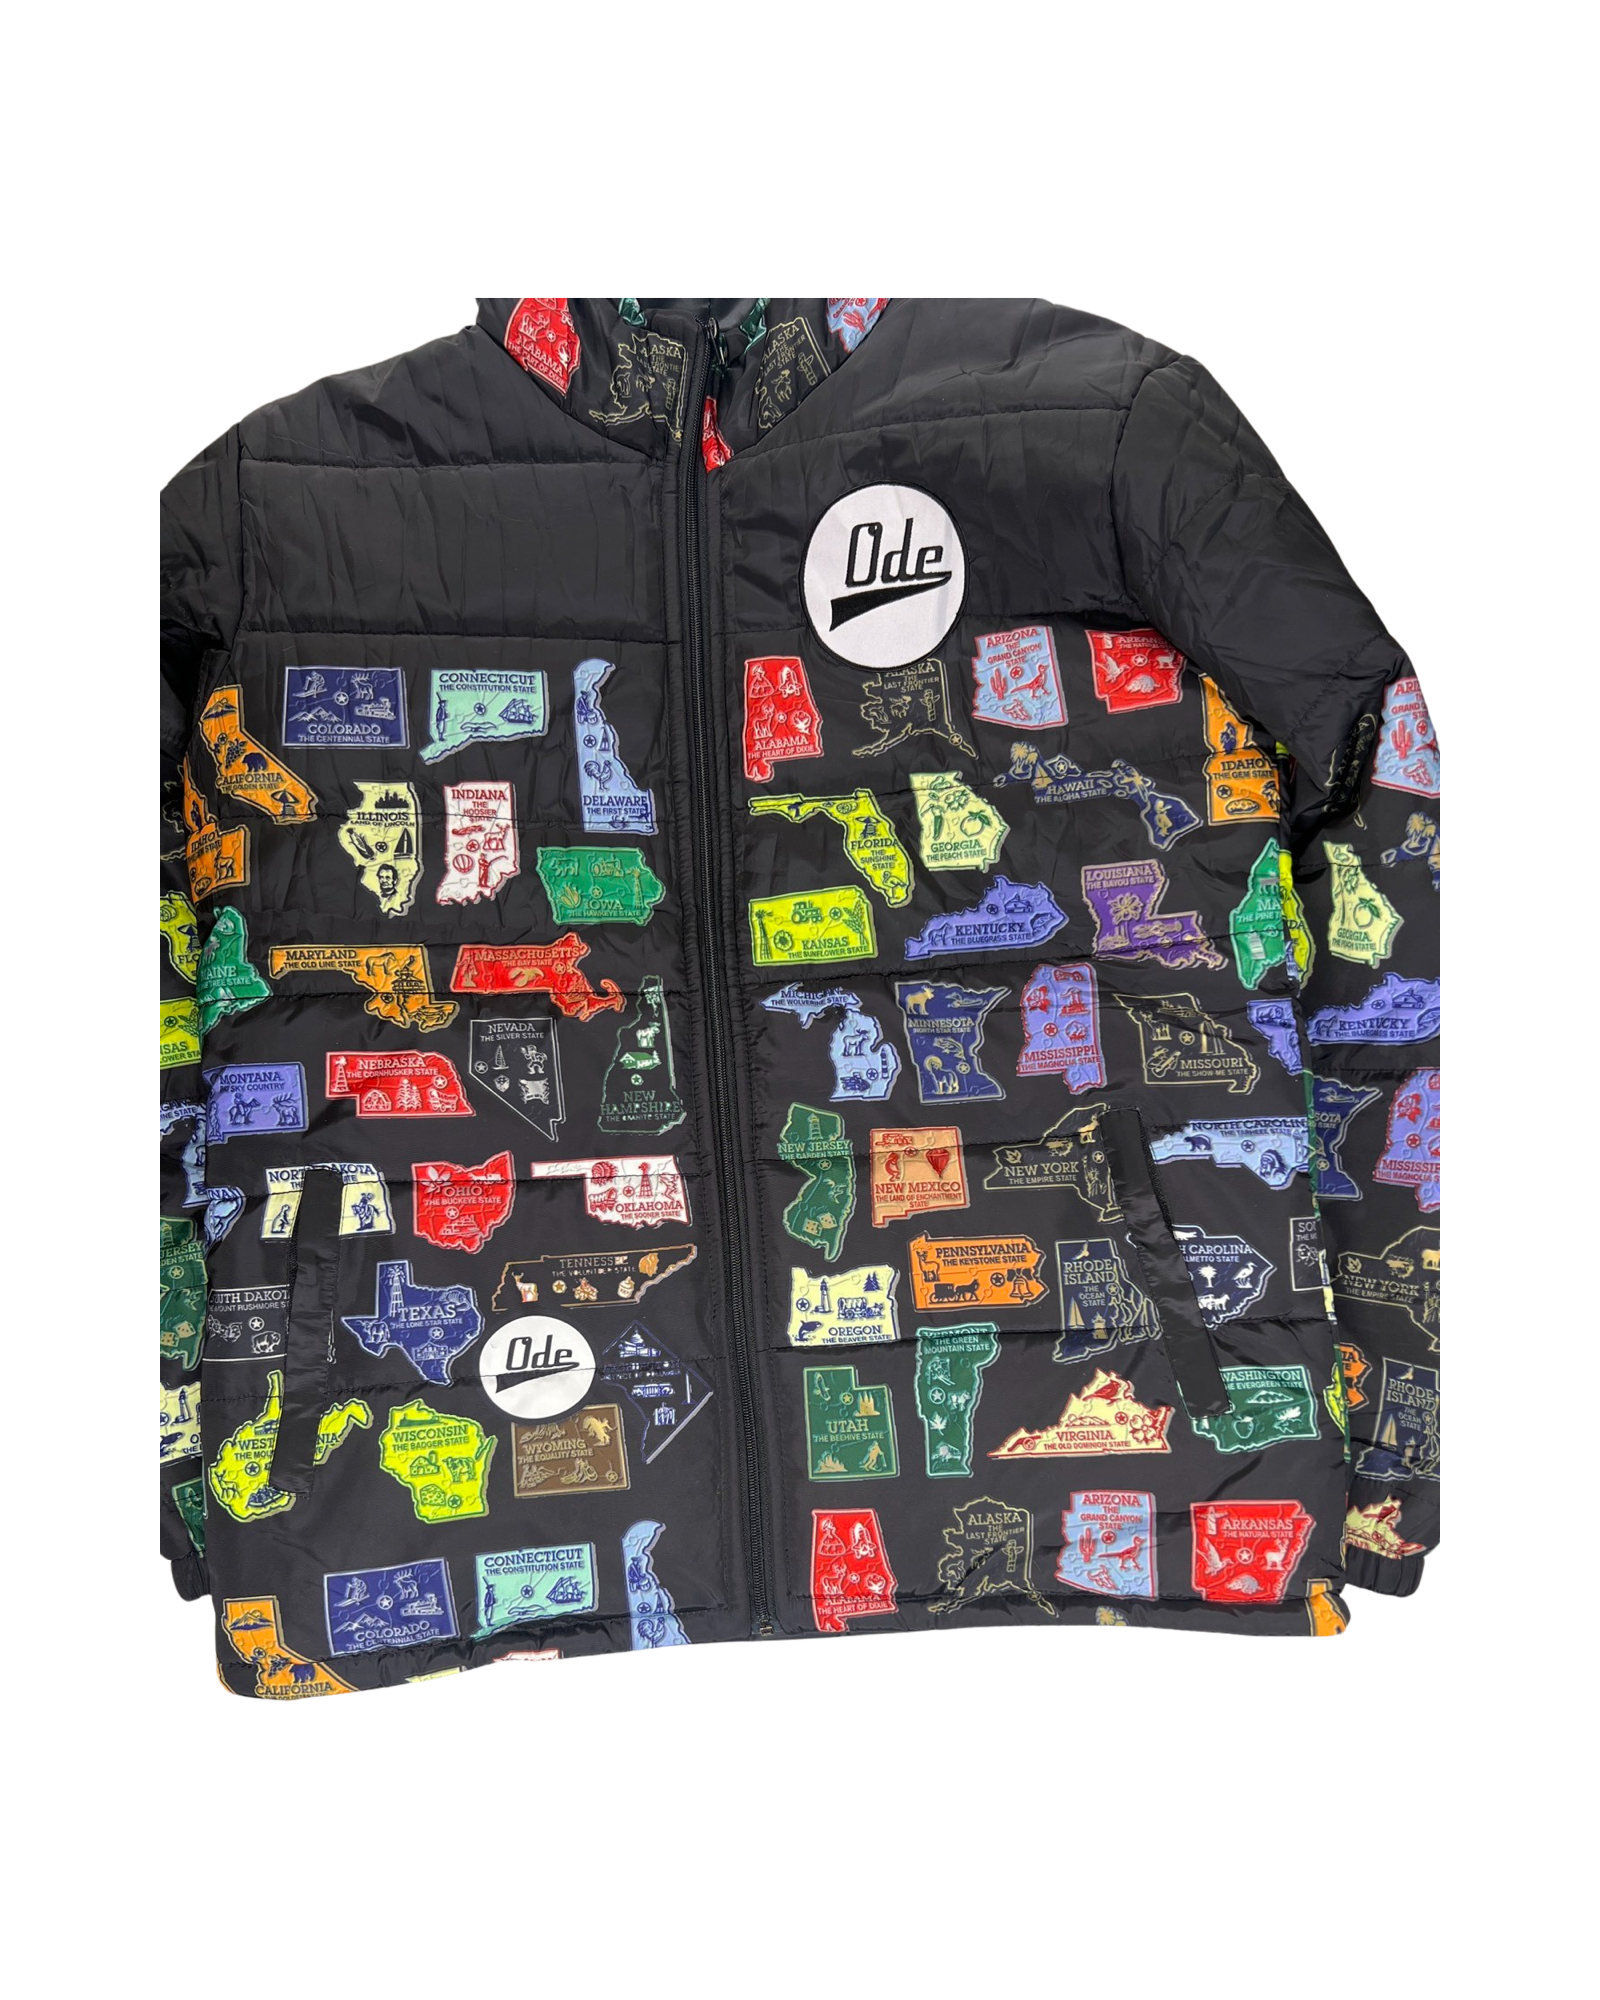 The Ode USA (United States-50 States) Puffer Jacket